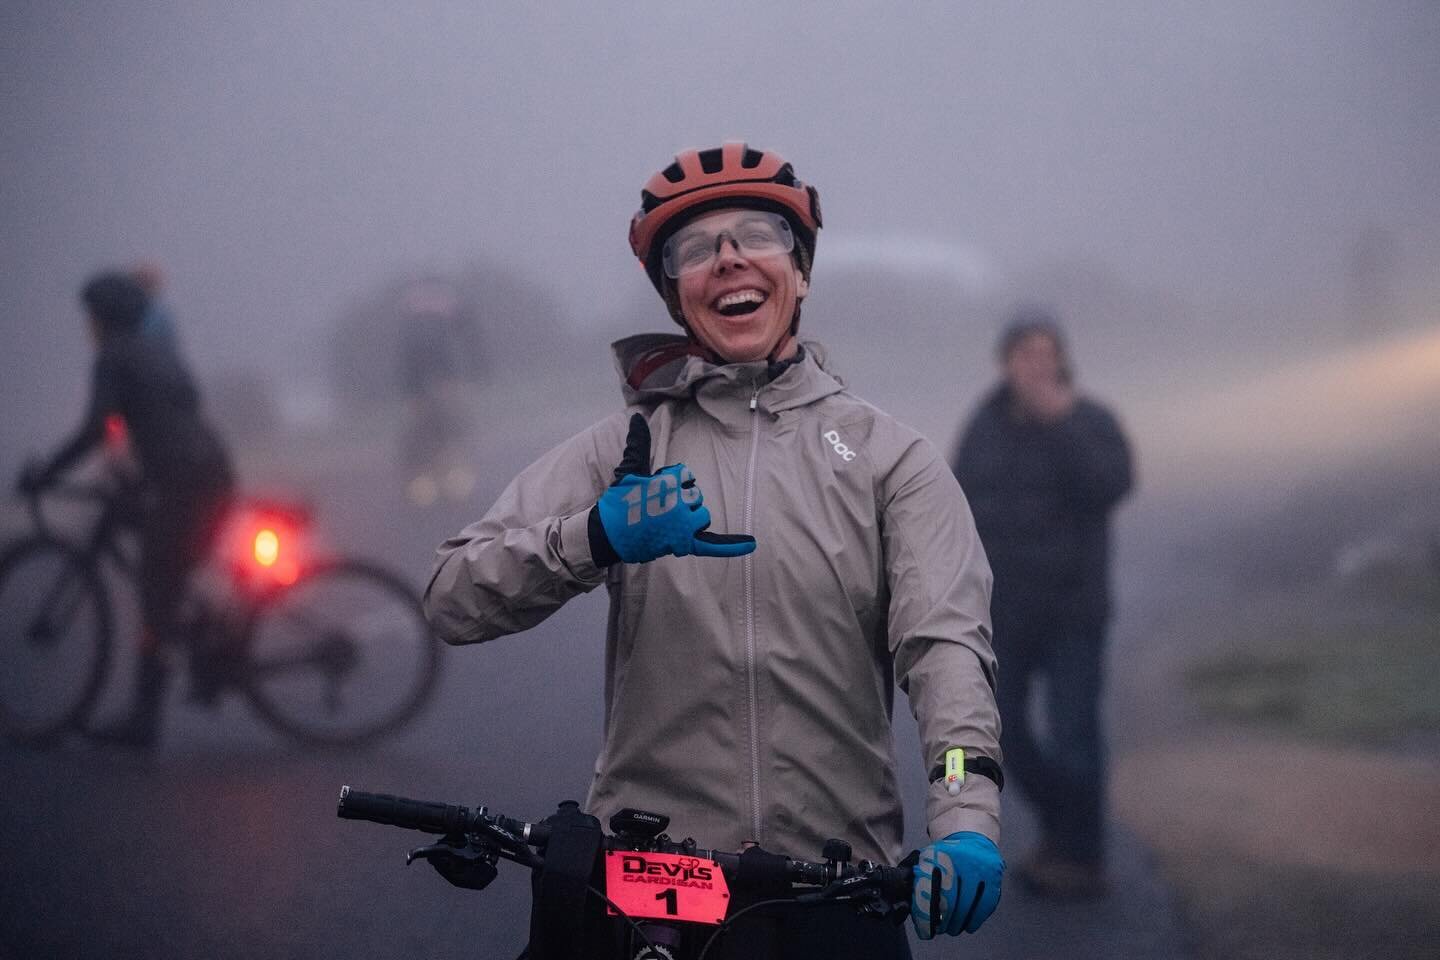 FIRST OFF THE LINE

Last year our elite women had the start line all to themselves. 
It was a full gas first wave from the foggy start line into Mutual Valley where the sun was waiting for them.

They&rsquo;ll be first off the line again in June.
Who